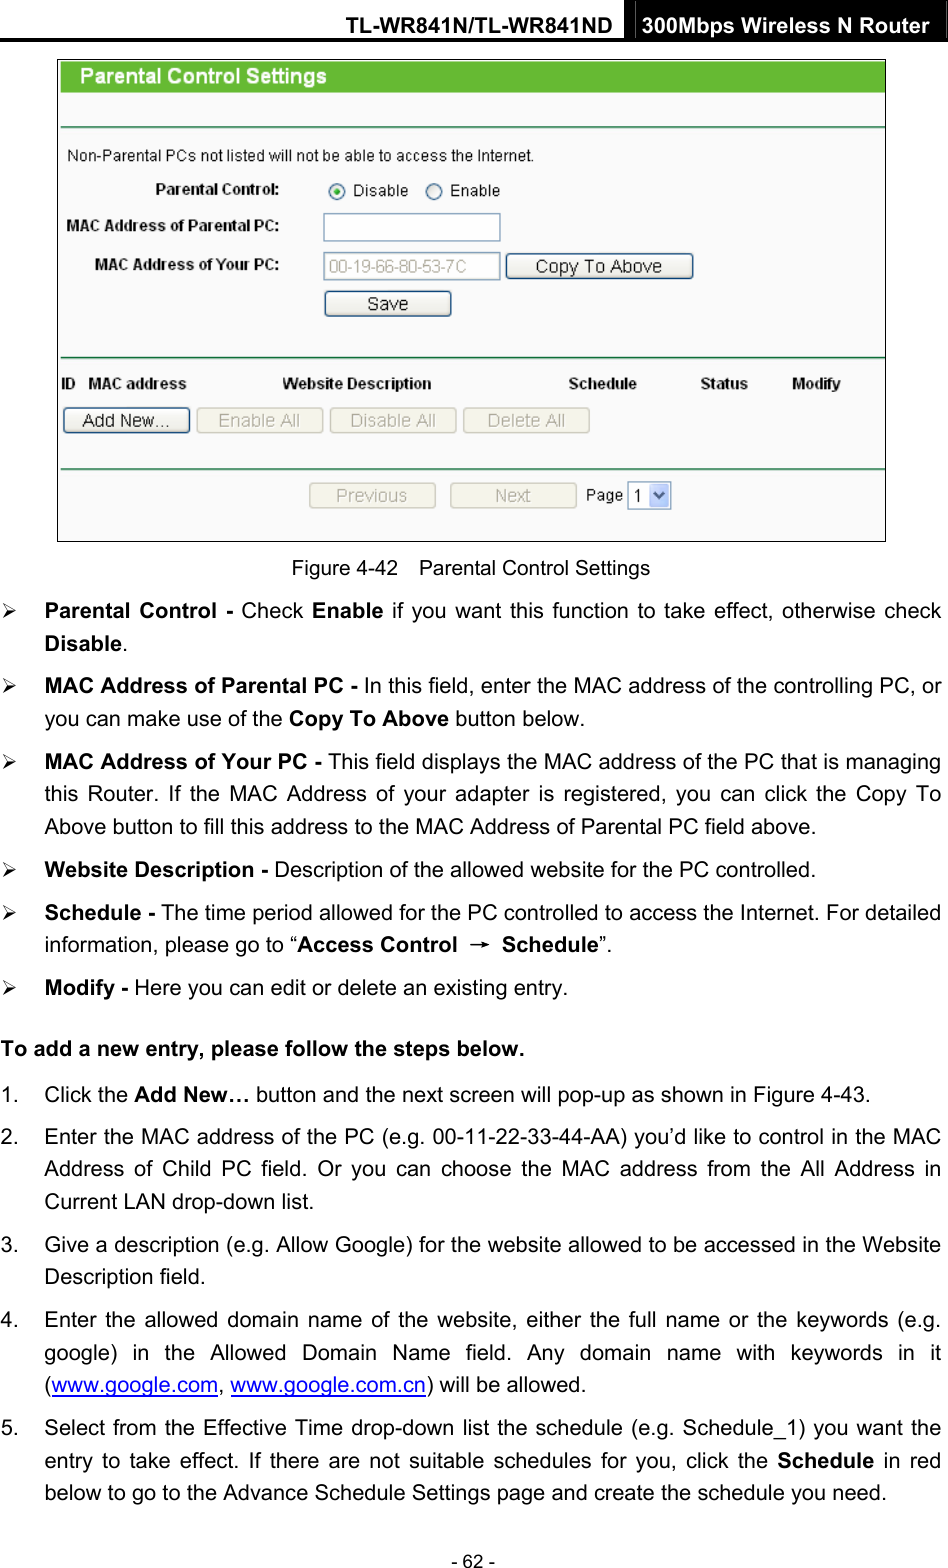 TL-WR841N/TL-WR841ND 300Mbps Wireless N Router - 62 -  Figure 4-42    Parental Control Settings ¾ Parental Control - Check Enable if you want this function to take effect, otherwise check Disable.  ¾ MAC Address of Parental PC - In this field, enter the MAC address of the controlling PC, or you can make use of the Copy To Above button below.   ¾ MAC Address of Your PC - This field displays the MAC address of the PC that is managing this Router. If the MAC Address of your adapter is registered, you can click the Copy To Above button to fill this address to the MAC Address of Parental PC field above.   ¾ Website Description - Description of the allowed website for the PC controlled.   ¾ Schedule - The time period allowed for the PC controlled to access the Internet. For detailed information, please go to “Access Control  → Schedule”.  ¾ Modify - Here you can edit or delete an existing entry.   To add a new entry, please follow the steps below. 1. Click the Add New… button and the next screen will pop-up as shown in Figure 4-43. 2.  Enter the MAC address of the PC (e.g. 00-11-22-33-44-AA) you’d like to control in the MAC Address of Child PC field. Or you can choose the MAC address from the All Address in Current LAN drop-down list. 3.  Give a description (e.g. Allow Google) for the website allowed to be accessed in the Website Description field. 4.  Enter the allowed domain name of the website, either the full name or the keywords (e.g. google) in the Allowed Domain Name field. Any domain name with keywords in it (www.google.com, www.google.com.cn) will be allowed. 5.  Select from the Effective Time drop-down list the schedule (e.g. Schedule_1) you want the entry to take effect. If there are not suitable schedules for you, click the Schedule  in red below to go to the Advance Schedule Settings page and create the schedule you need. 